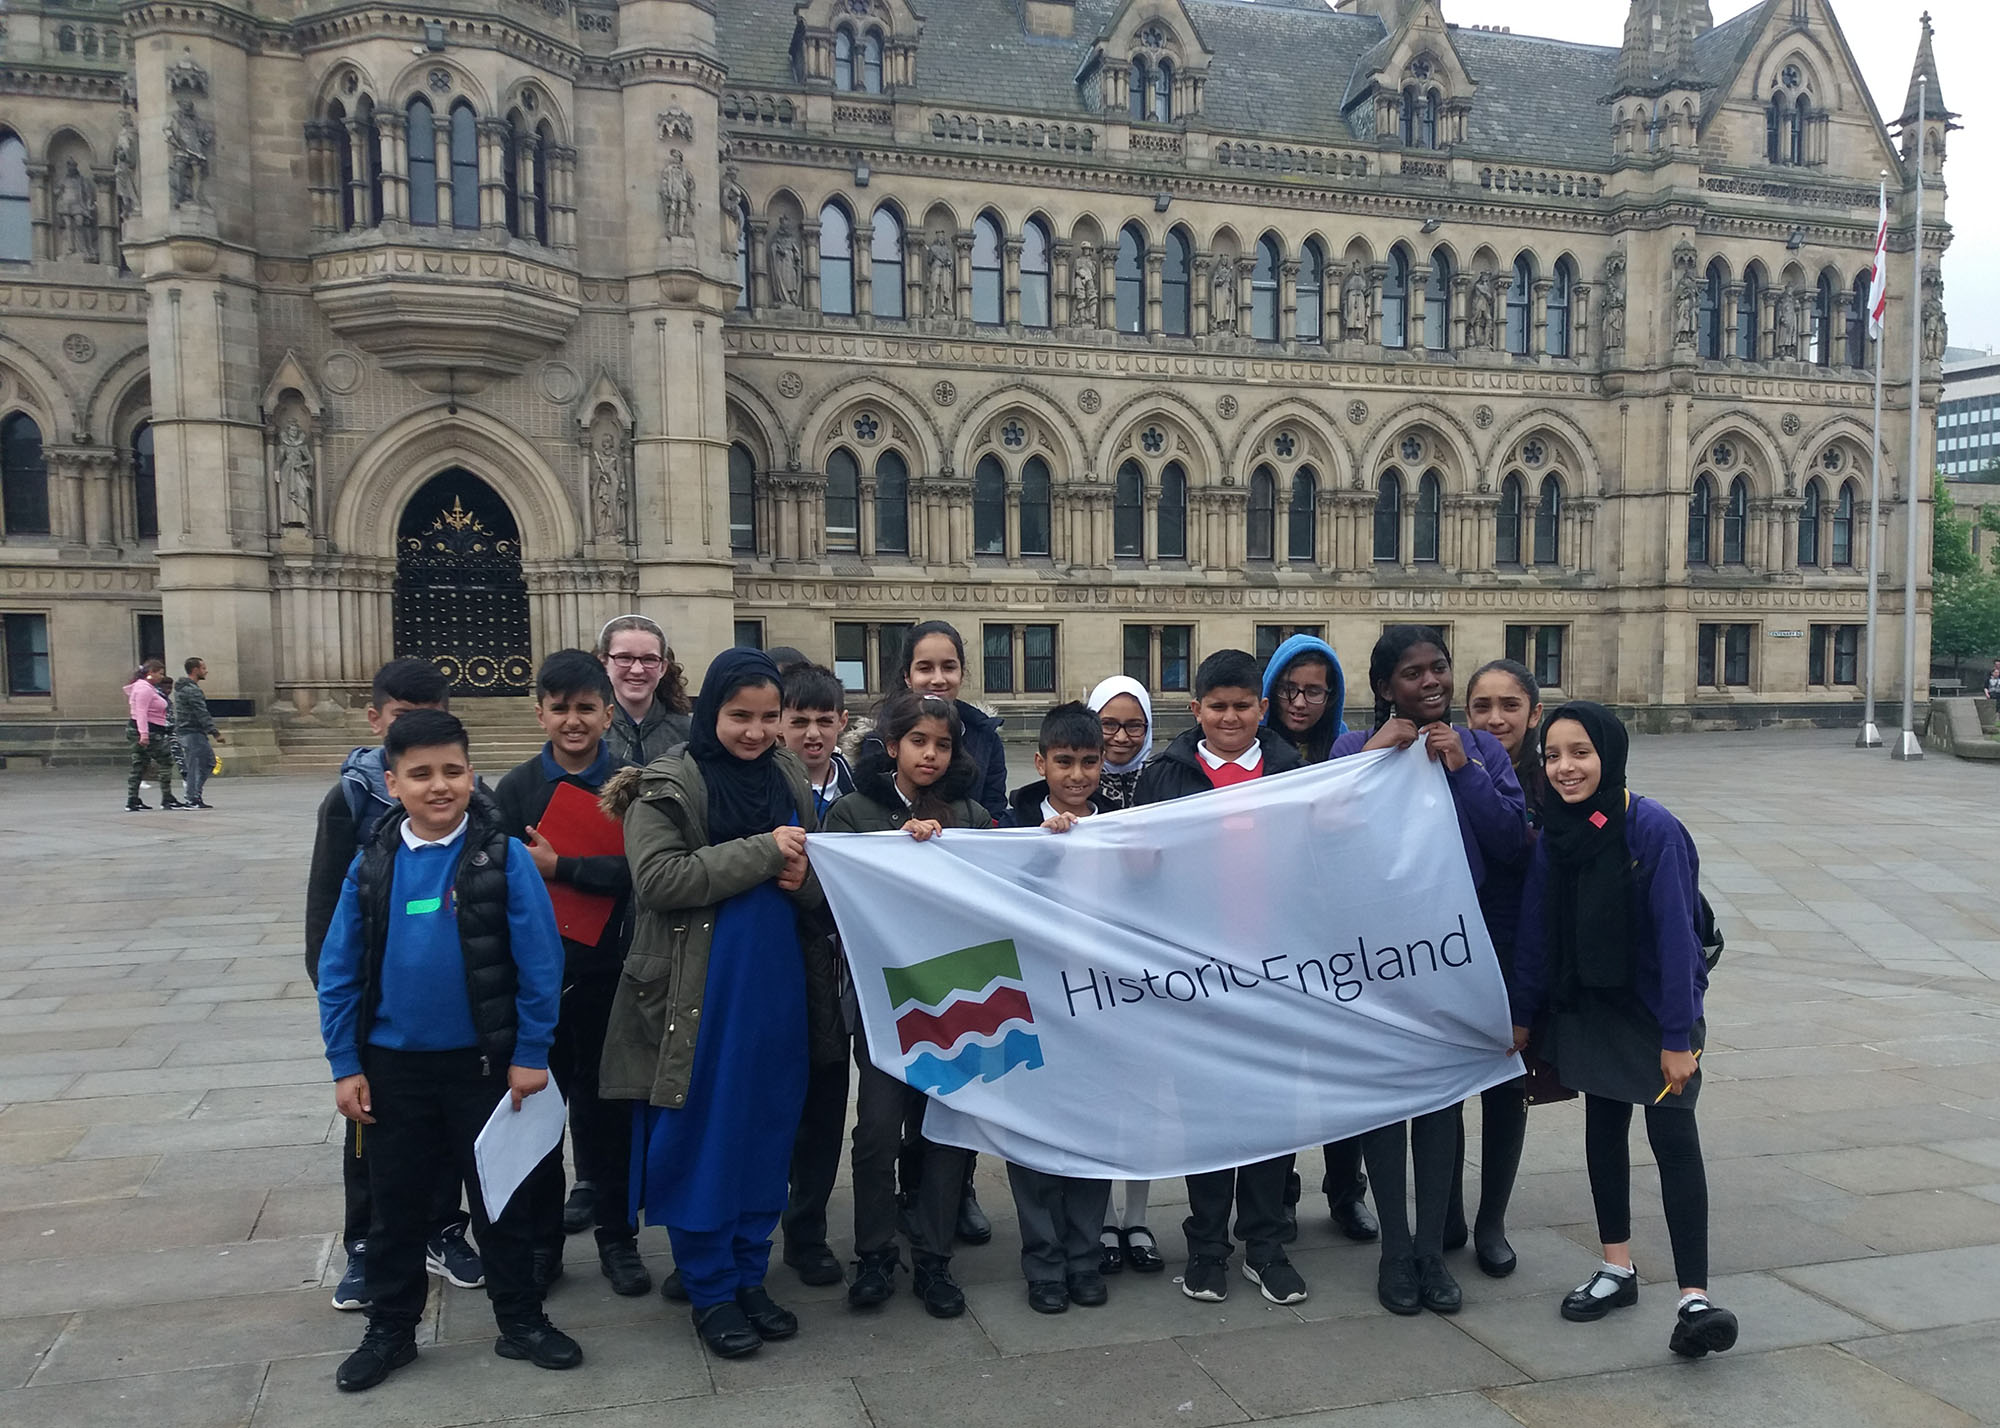 Pupils outside Bradford City Hall holding a banner with the Historic England logo on it.